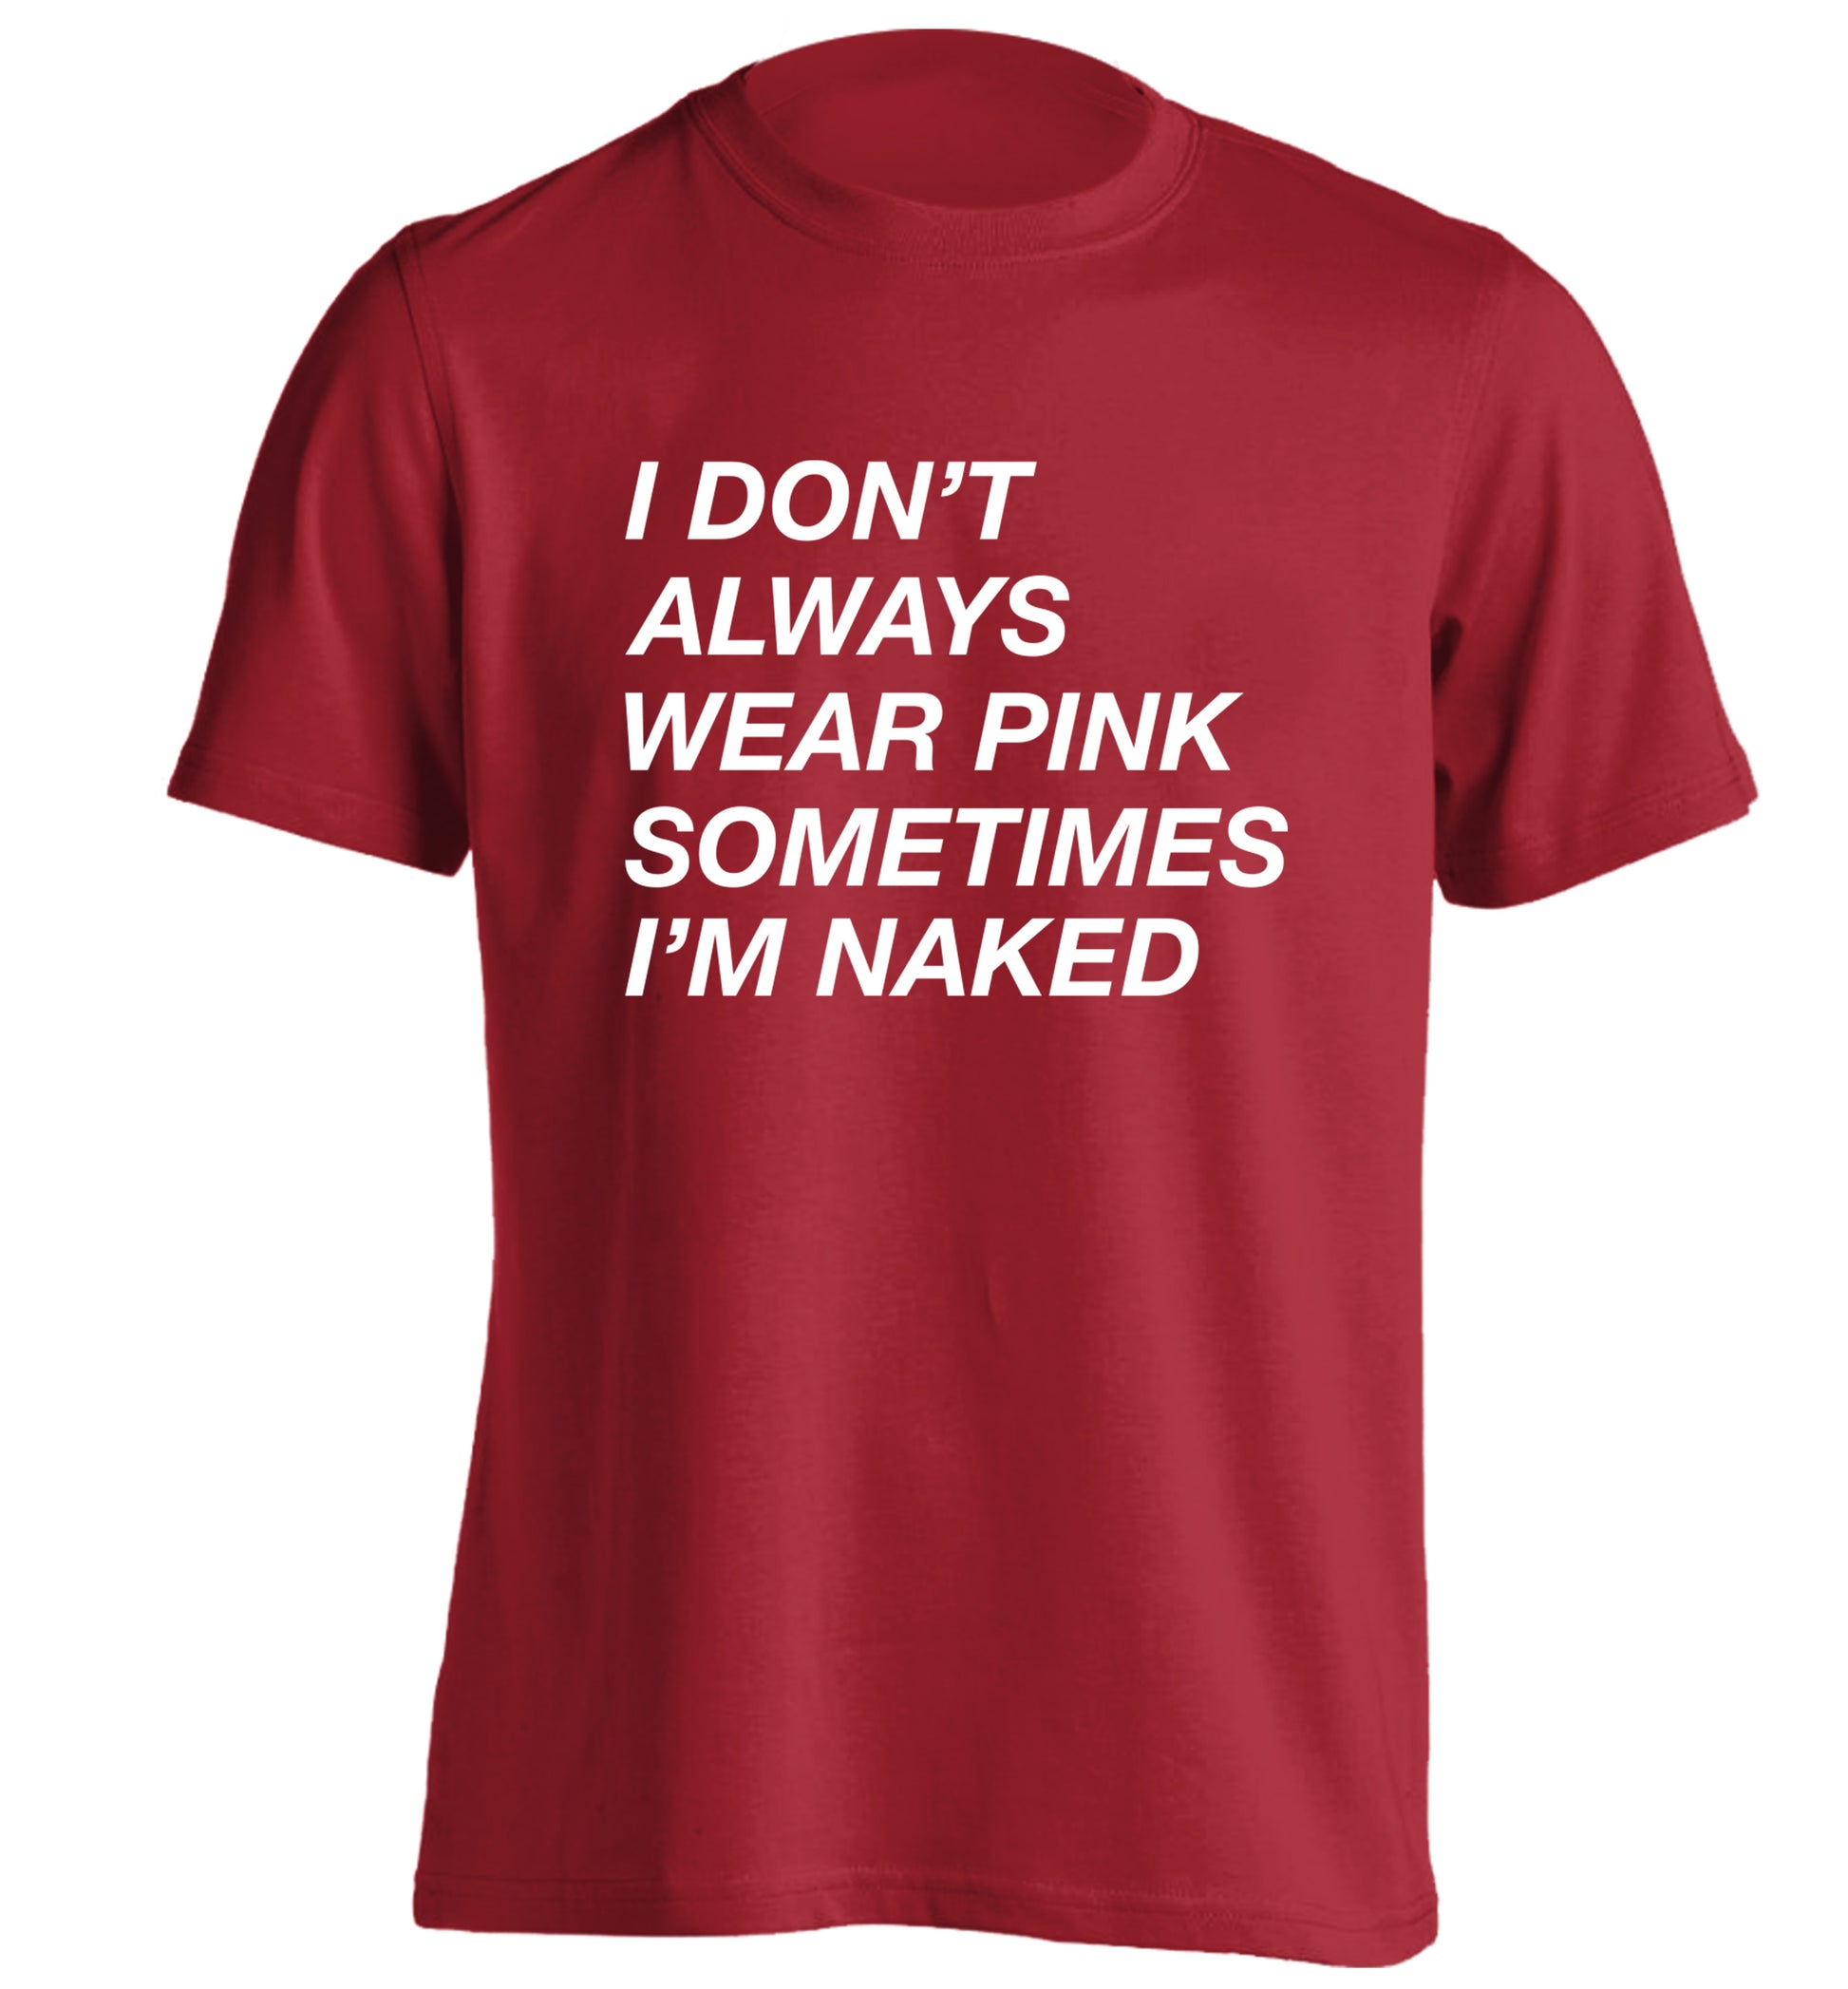 I don't always wear pink sometimes I'm naked adults unisex red Tshirt 2XL